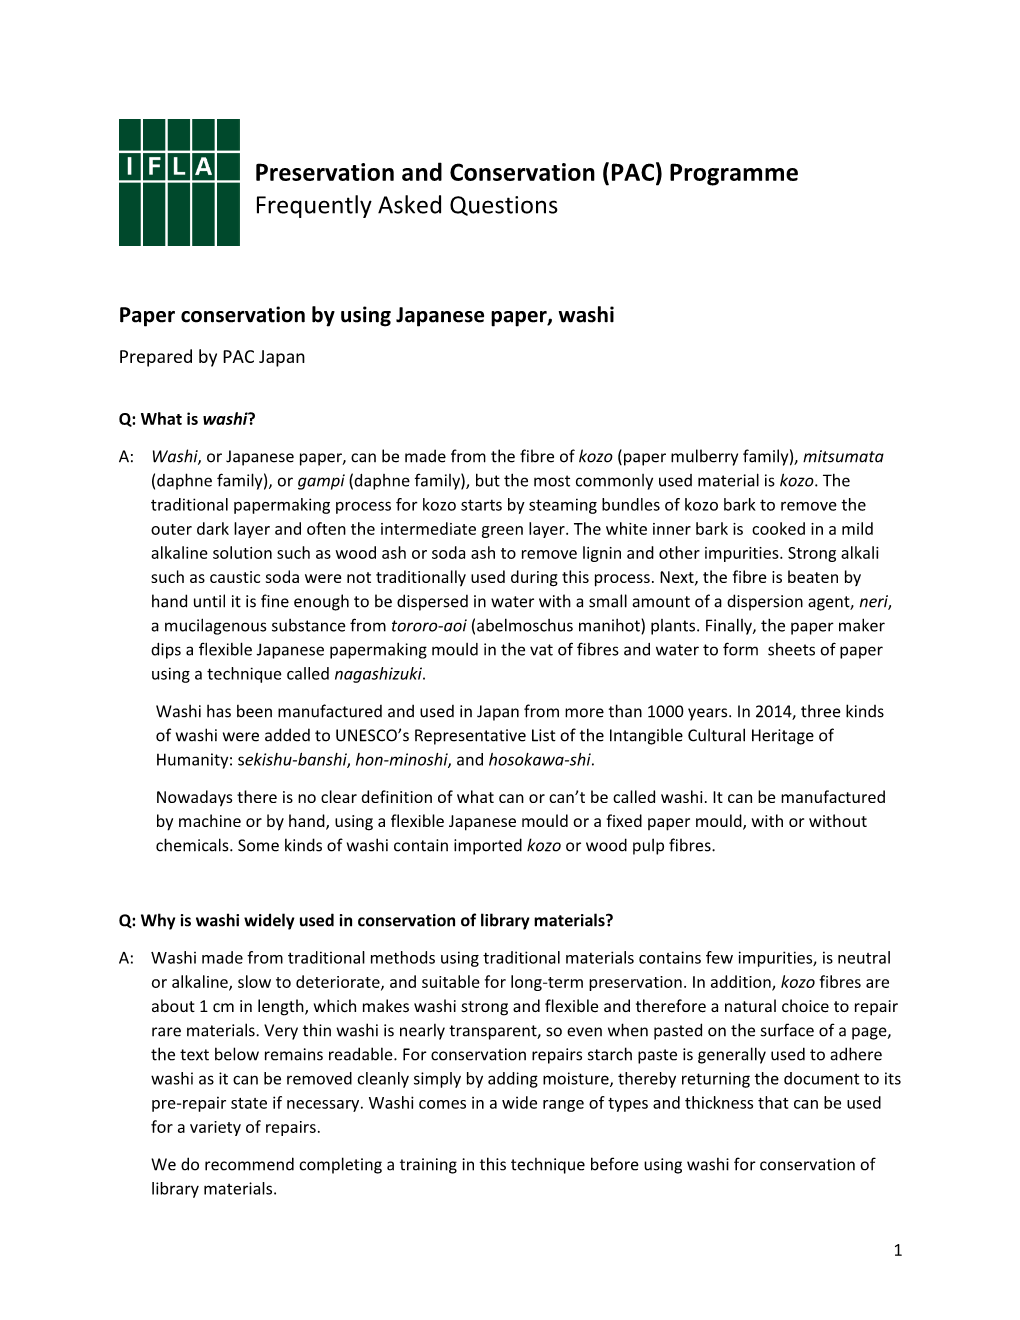 Preservation and Conservation (PAC) Programme Frequently Asked Questions